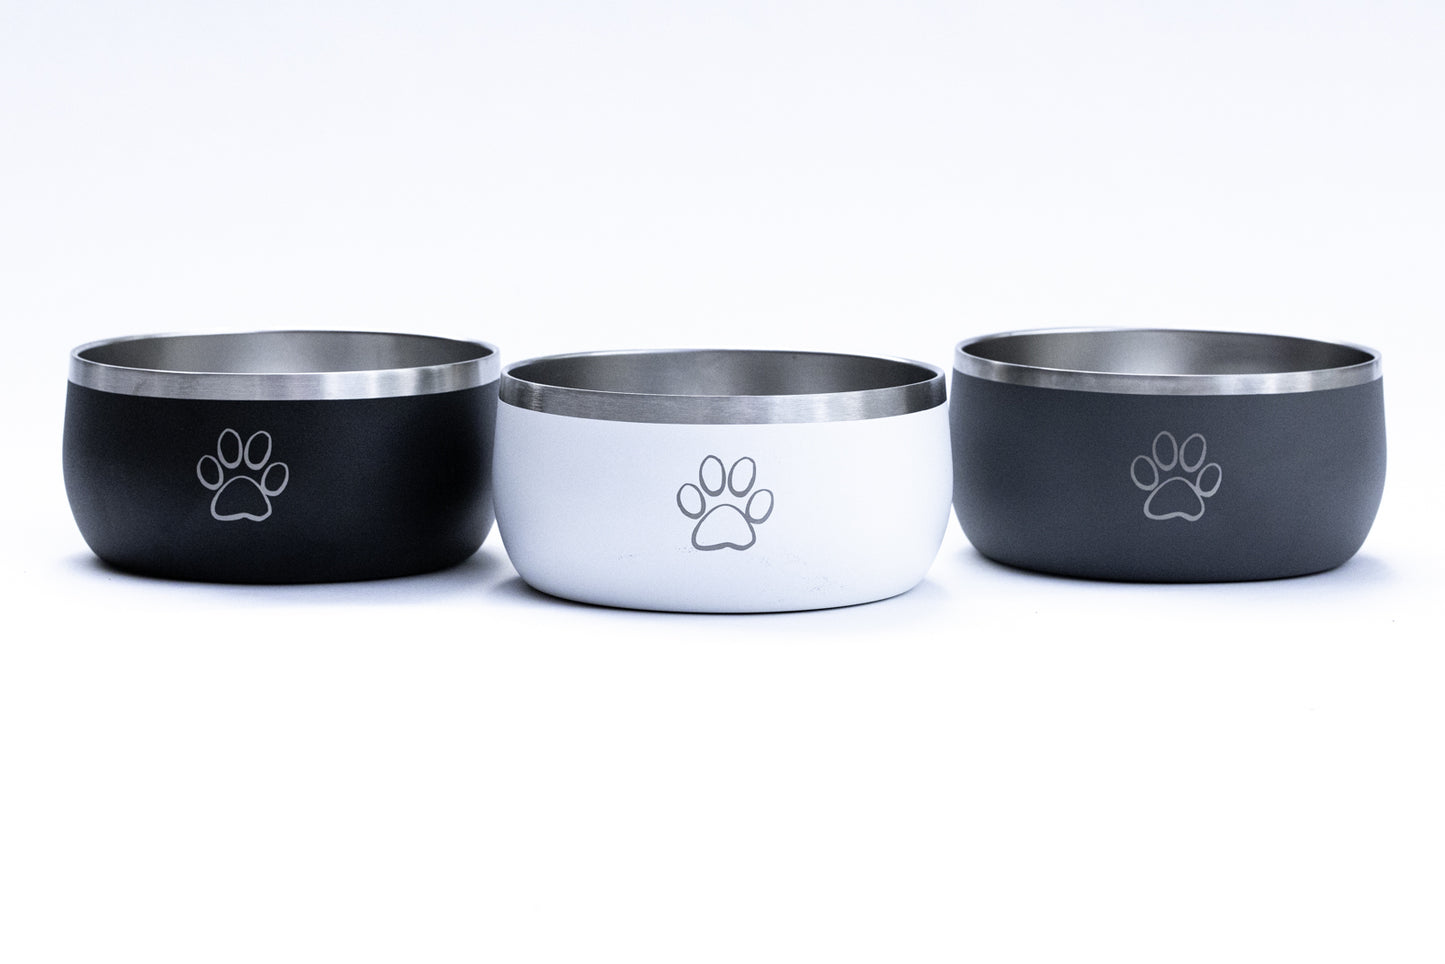 Stainless Steel Powder Coated Dog Bowl - 34 oz - (3 colors)